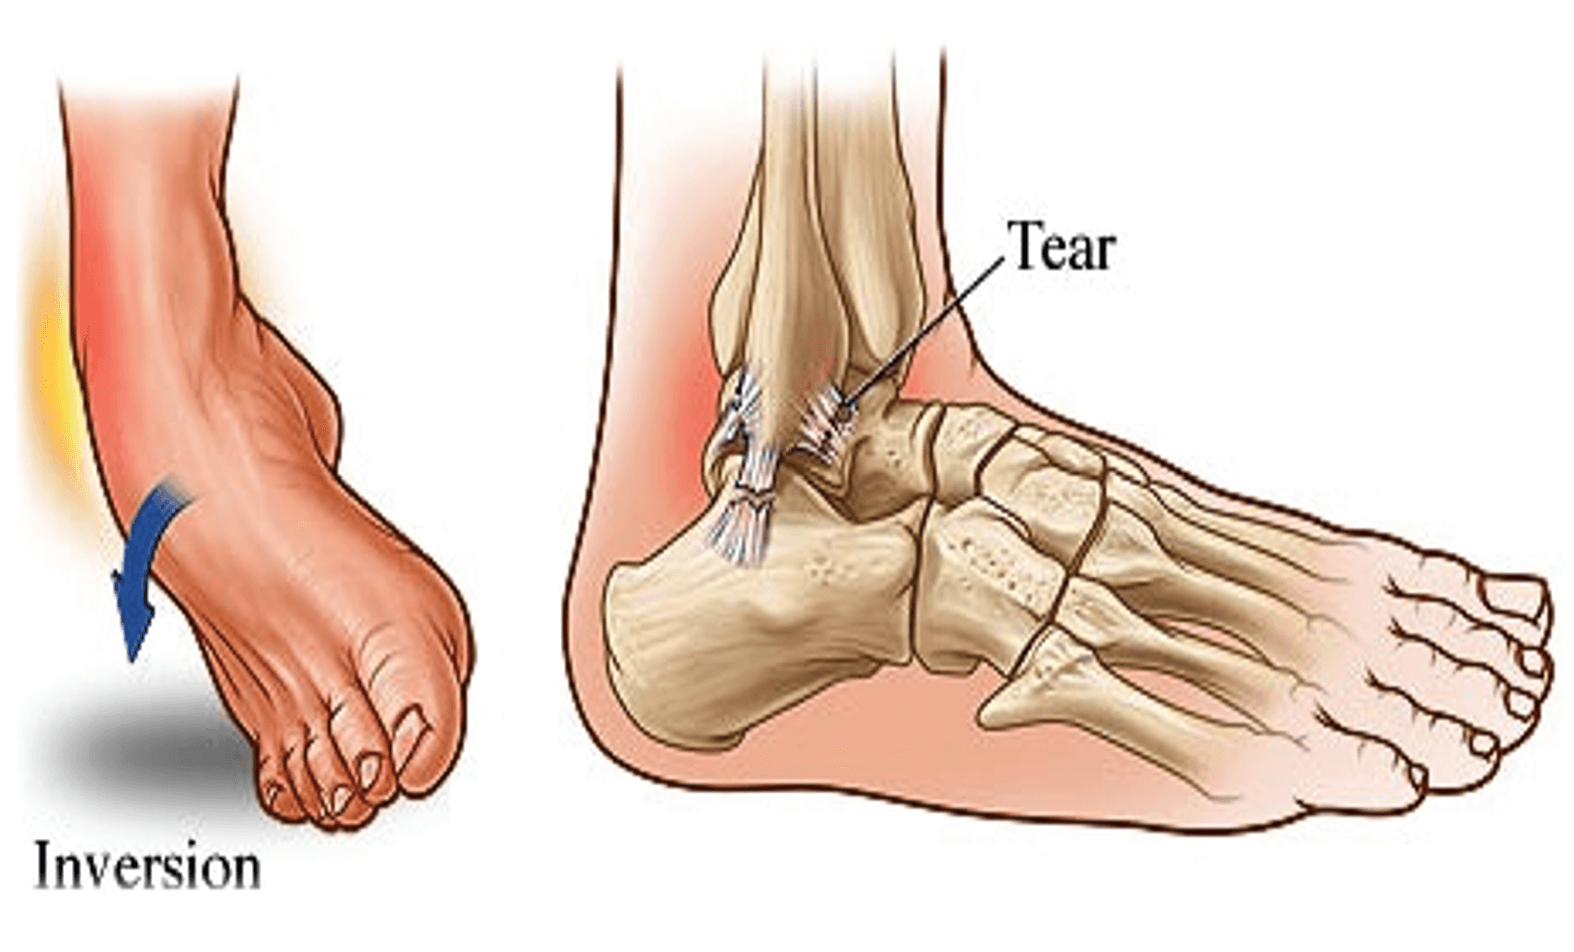 9 Best Sprained ankle exercises ideas